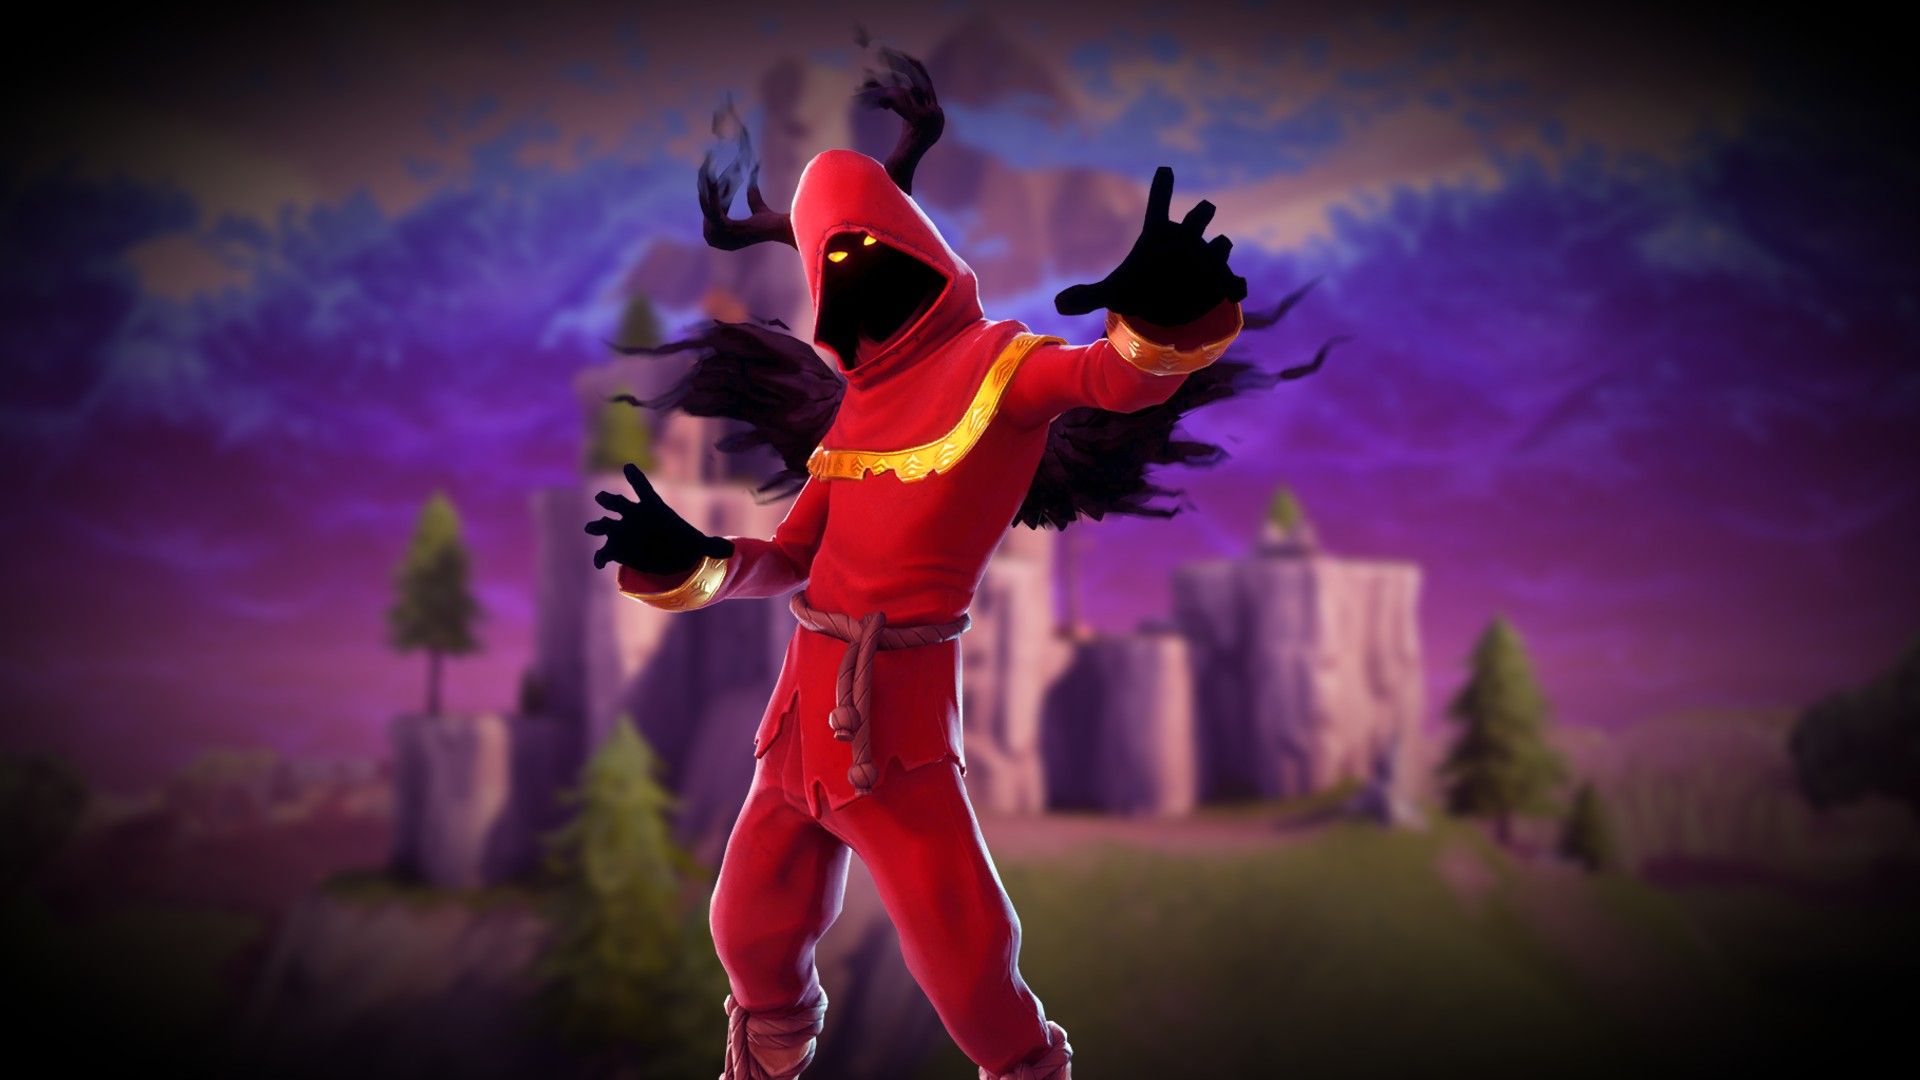 Cloaked Shadow Most Popular Skin Among Fortnite Streamers